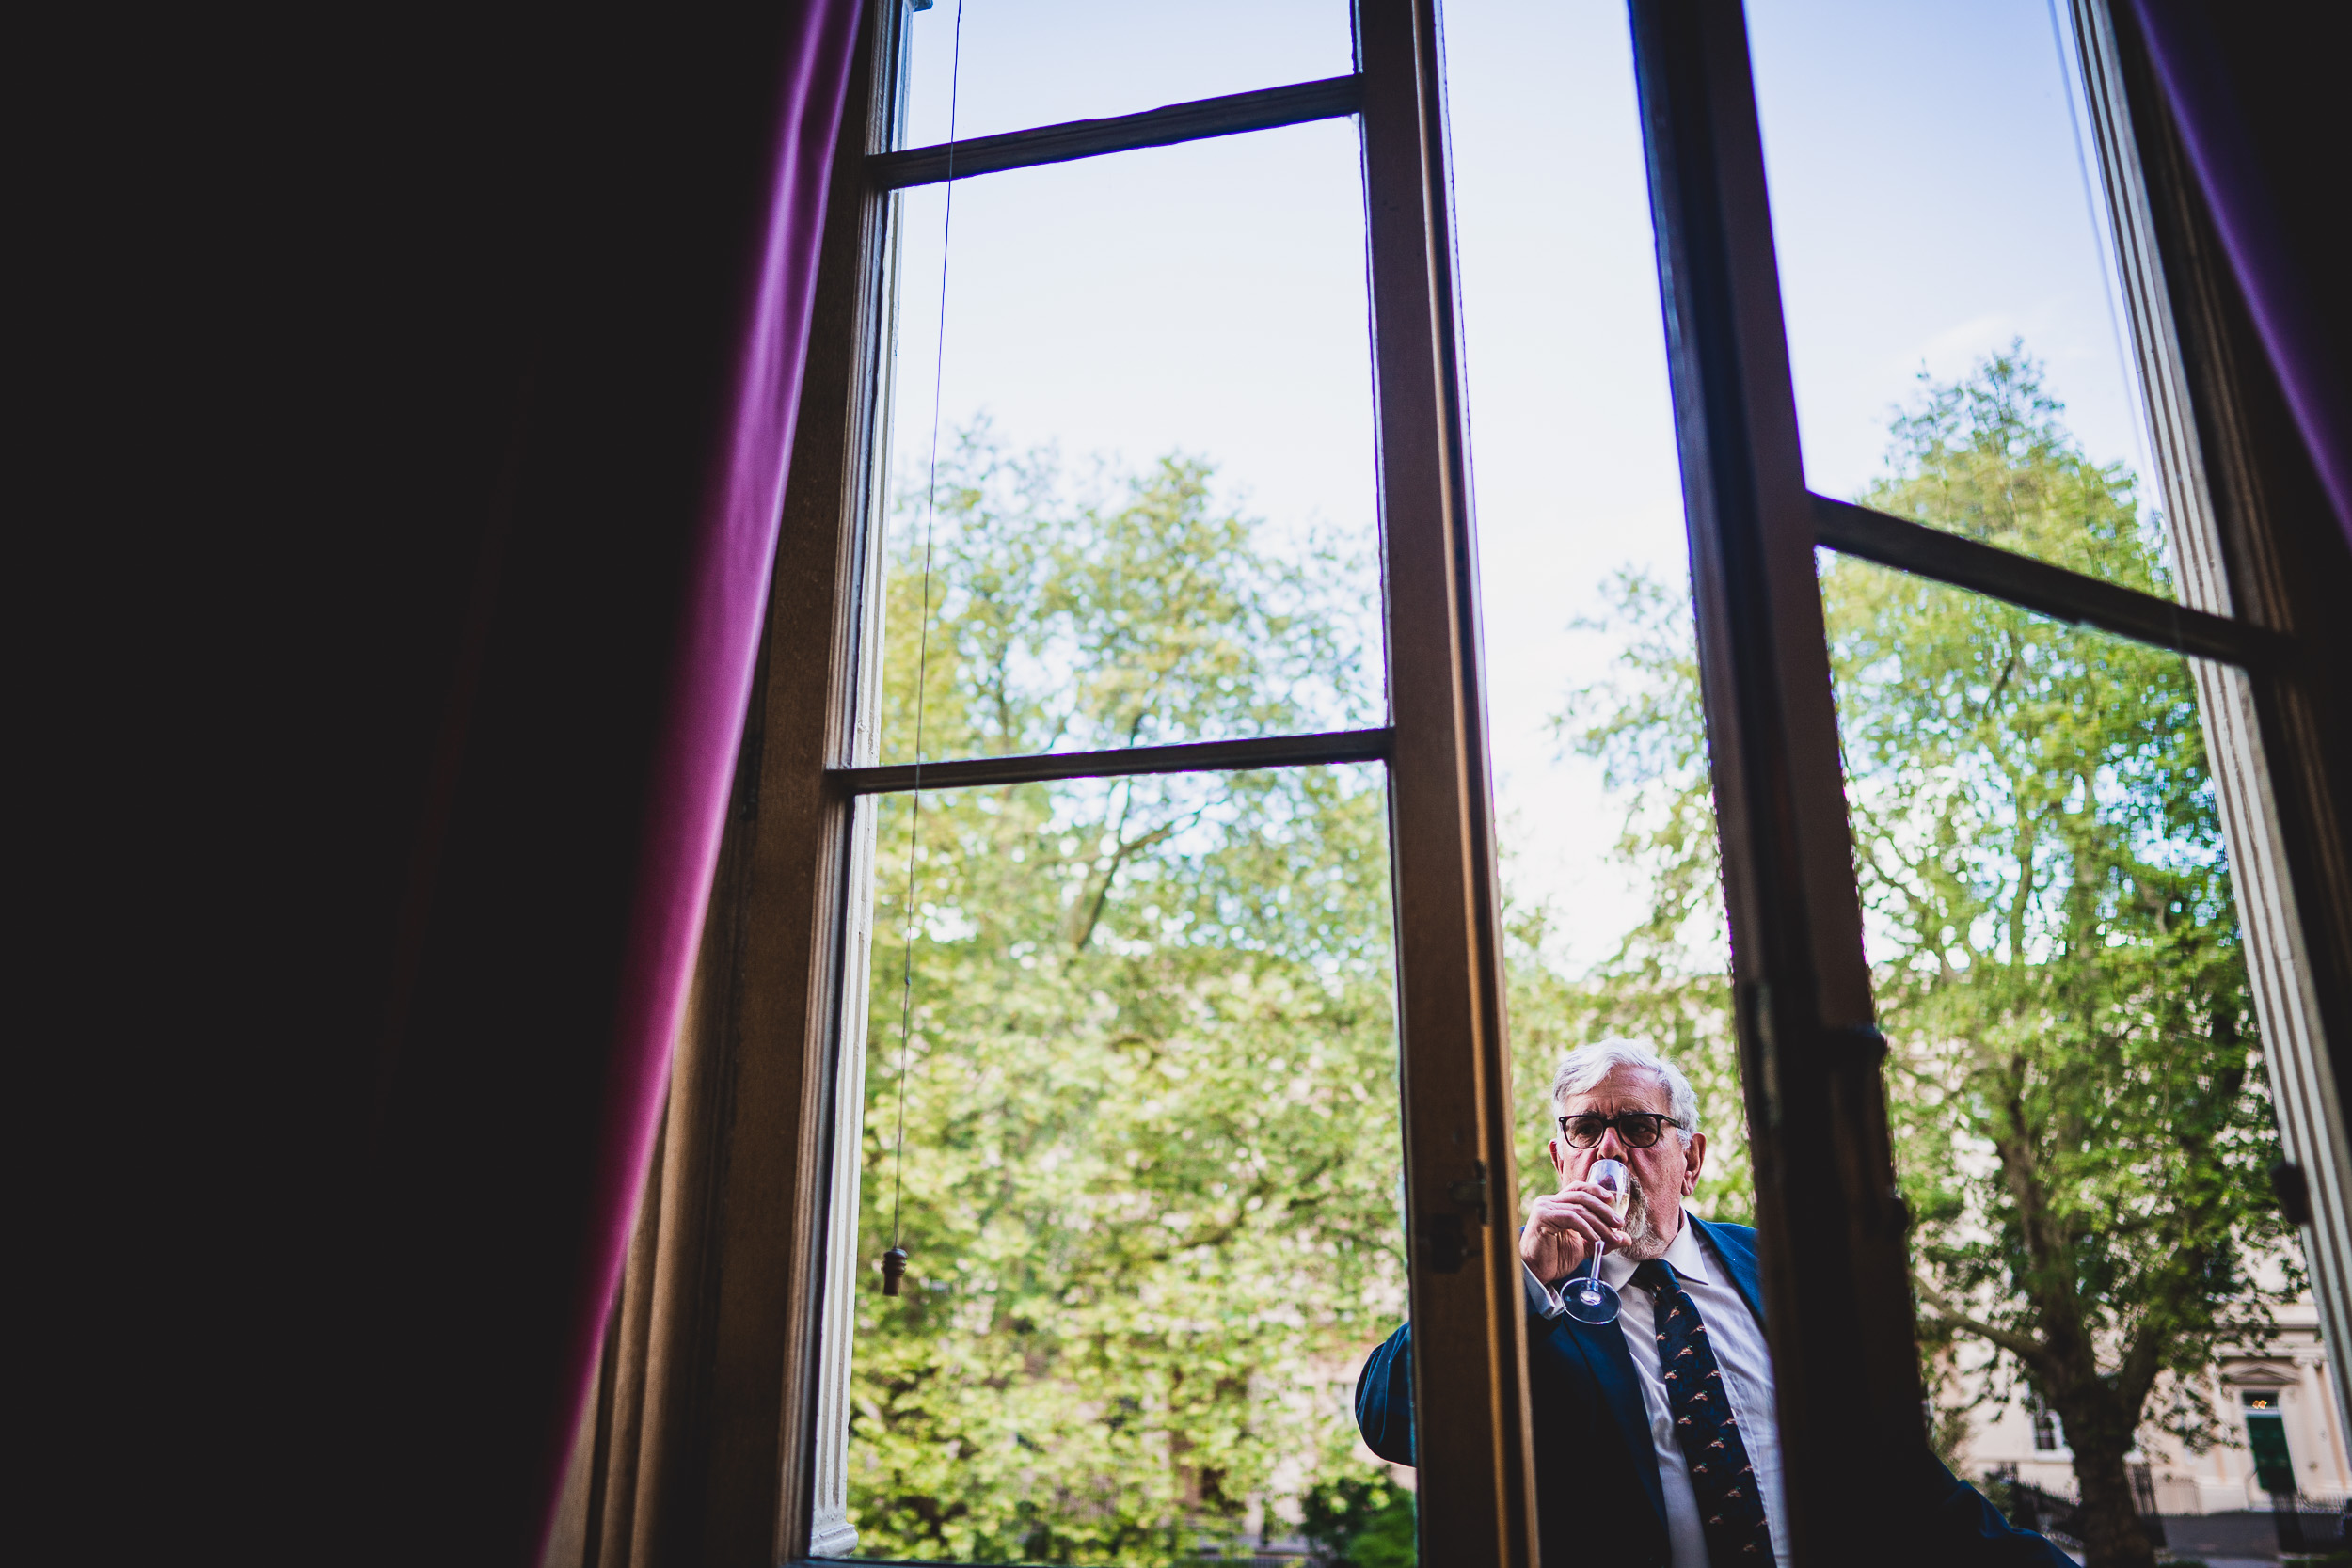 A groom in a suit looking out of a window.